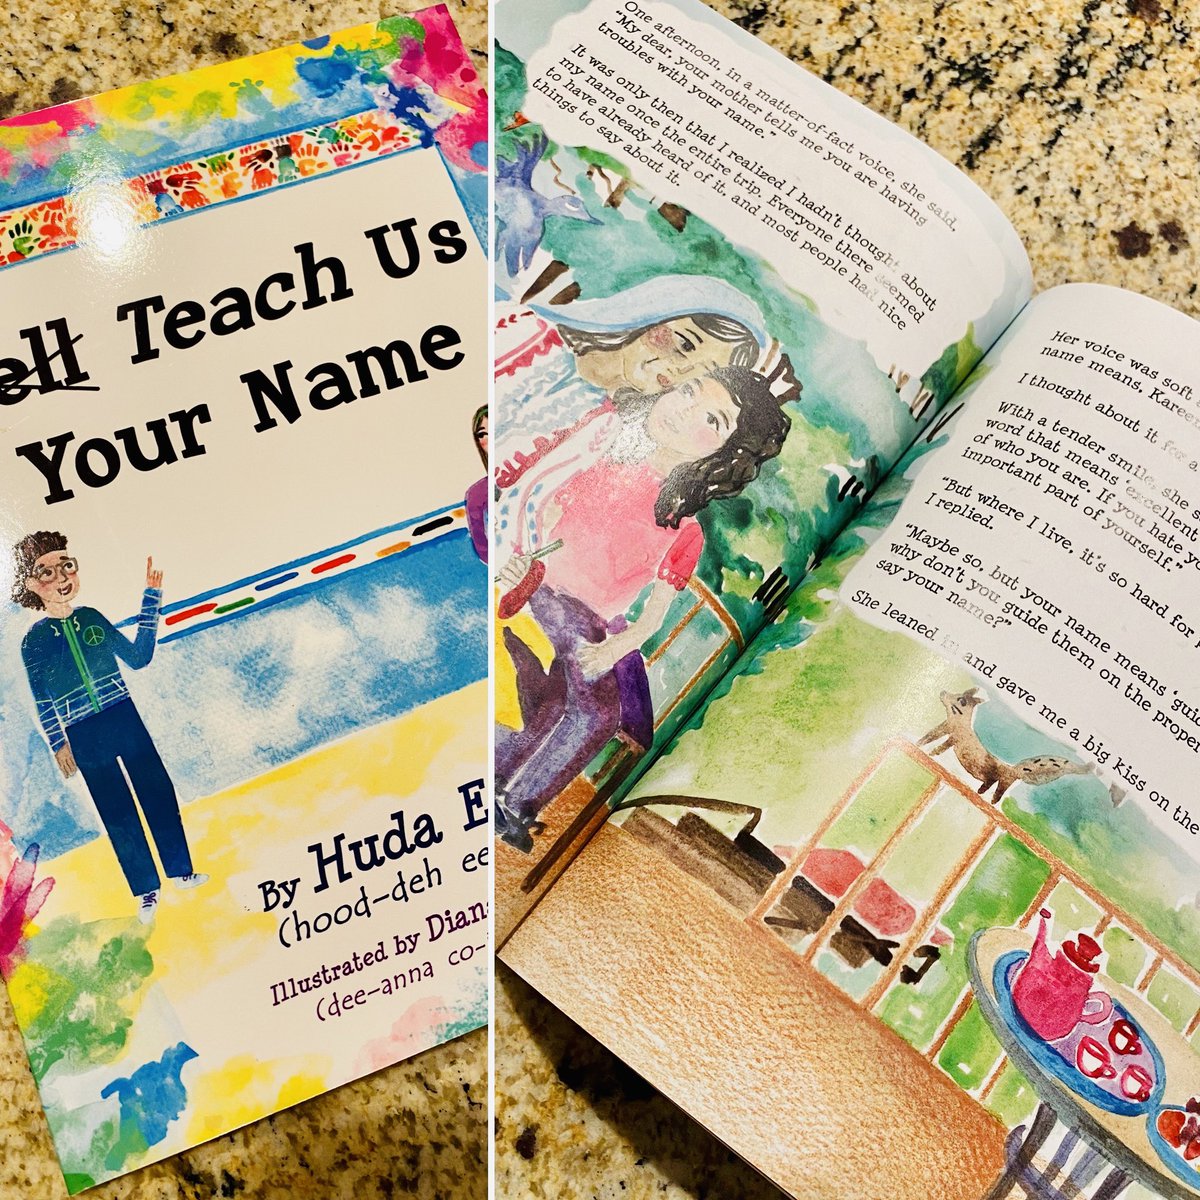 So glad I bought this beautiful book by Huda Essa - to share the pride we should all take in teaching our names and their significance to others. #teachusyourname #tedtalk #ithinkaflipgrid #orabulletinboard #bebetter @Hartford_Public @mathcoachrivera tinyurl.com/hwkp7w2m